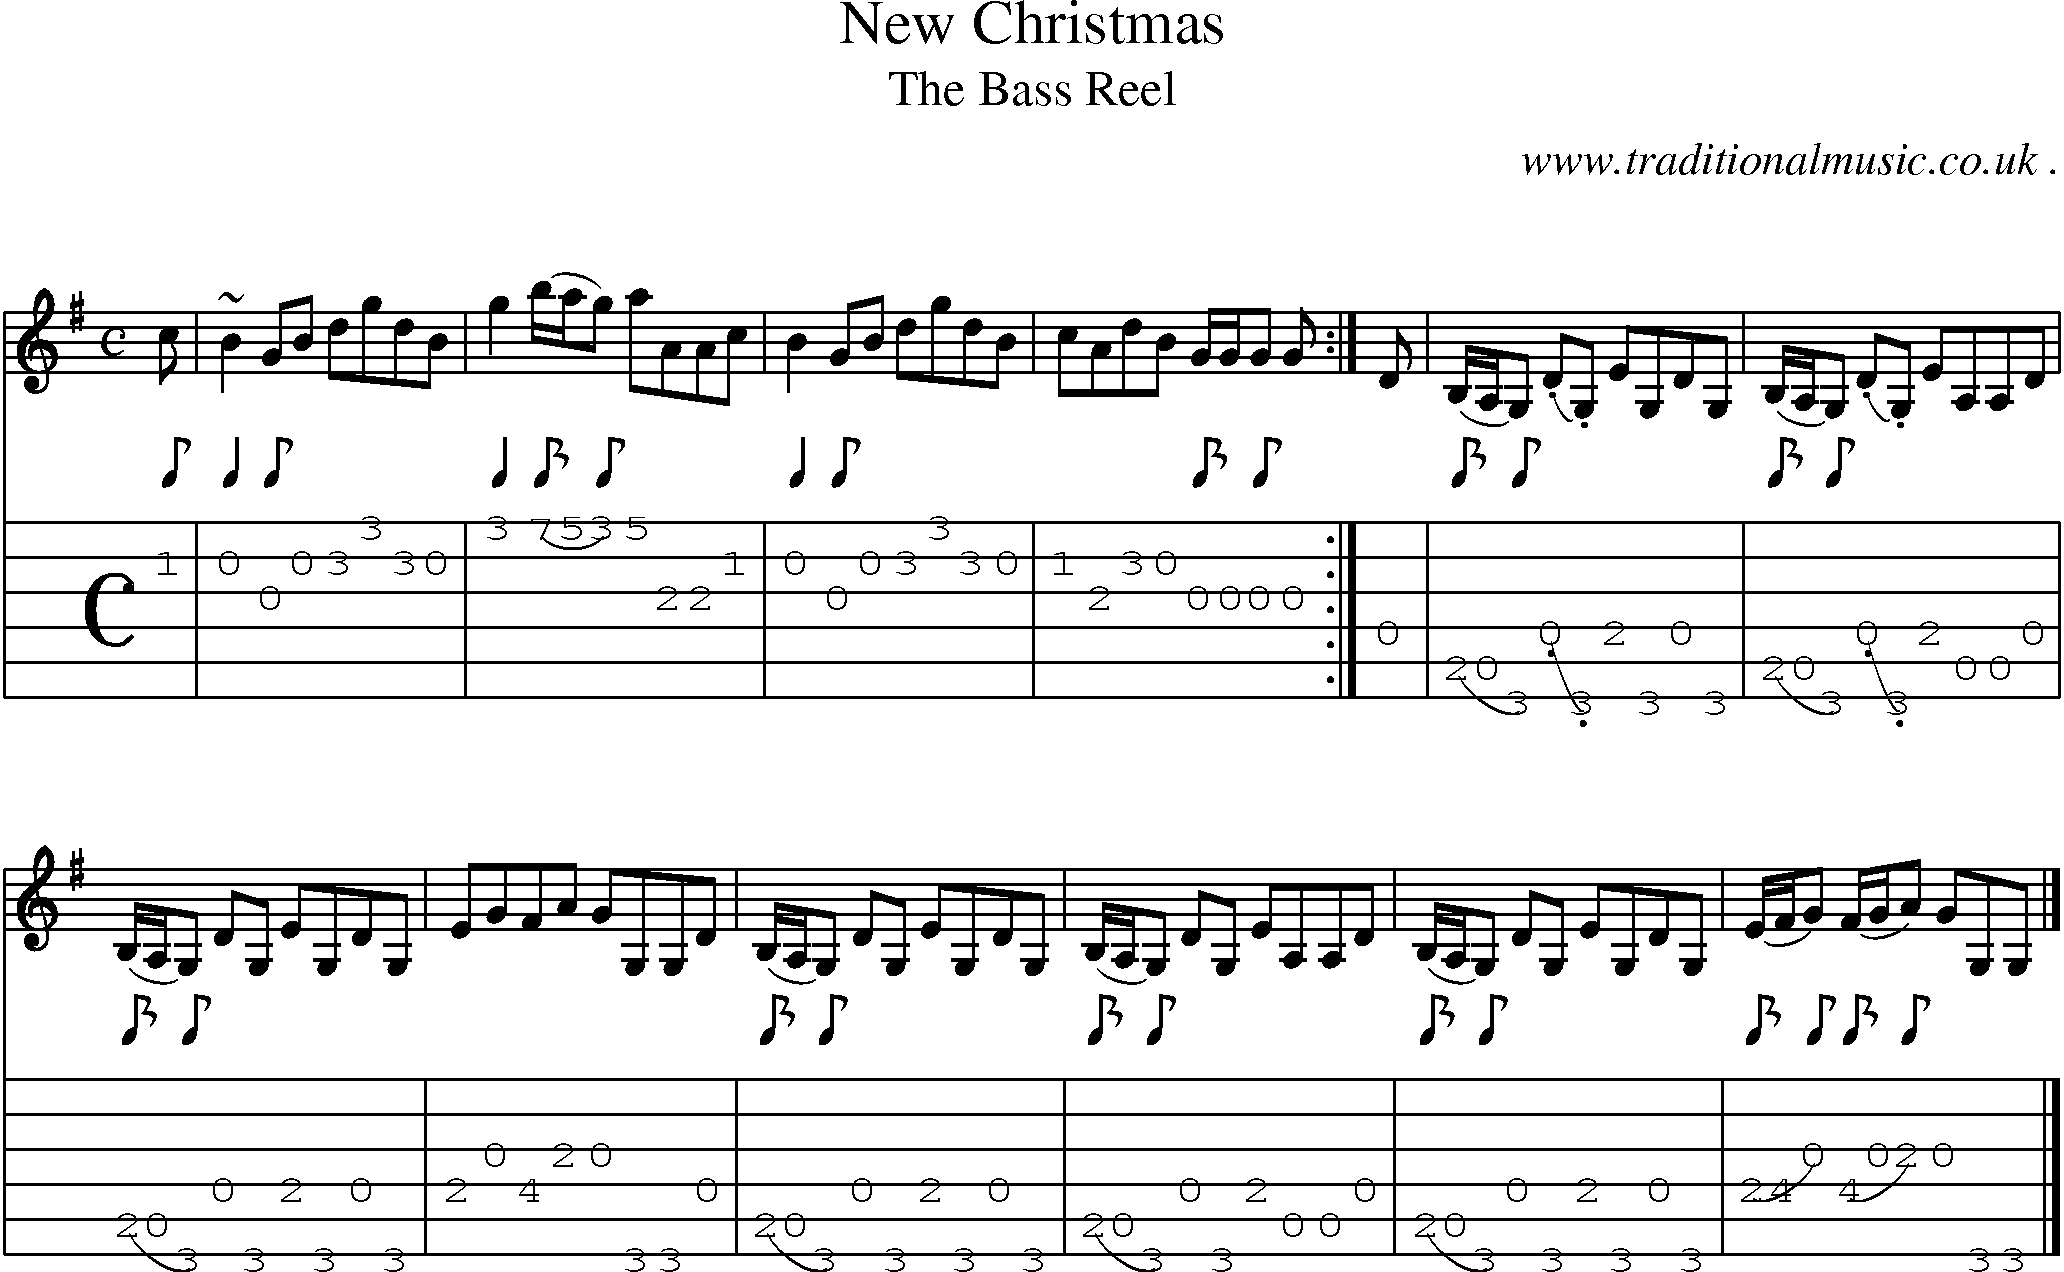 Sheet-music  score, Chords and Guitar Tabs for New Christmas